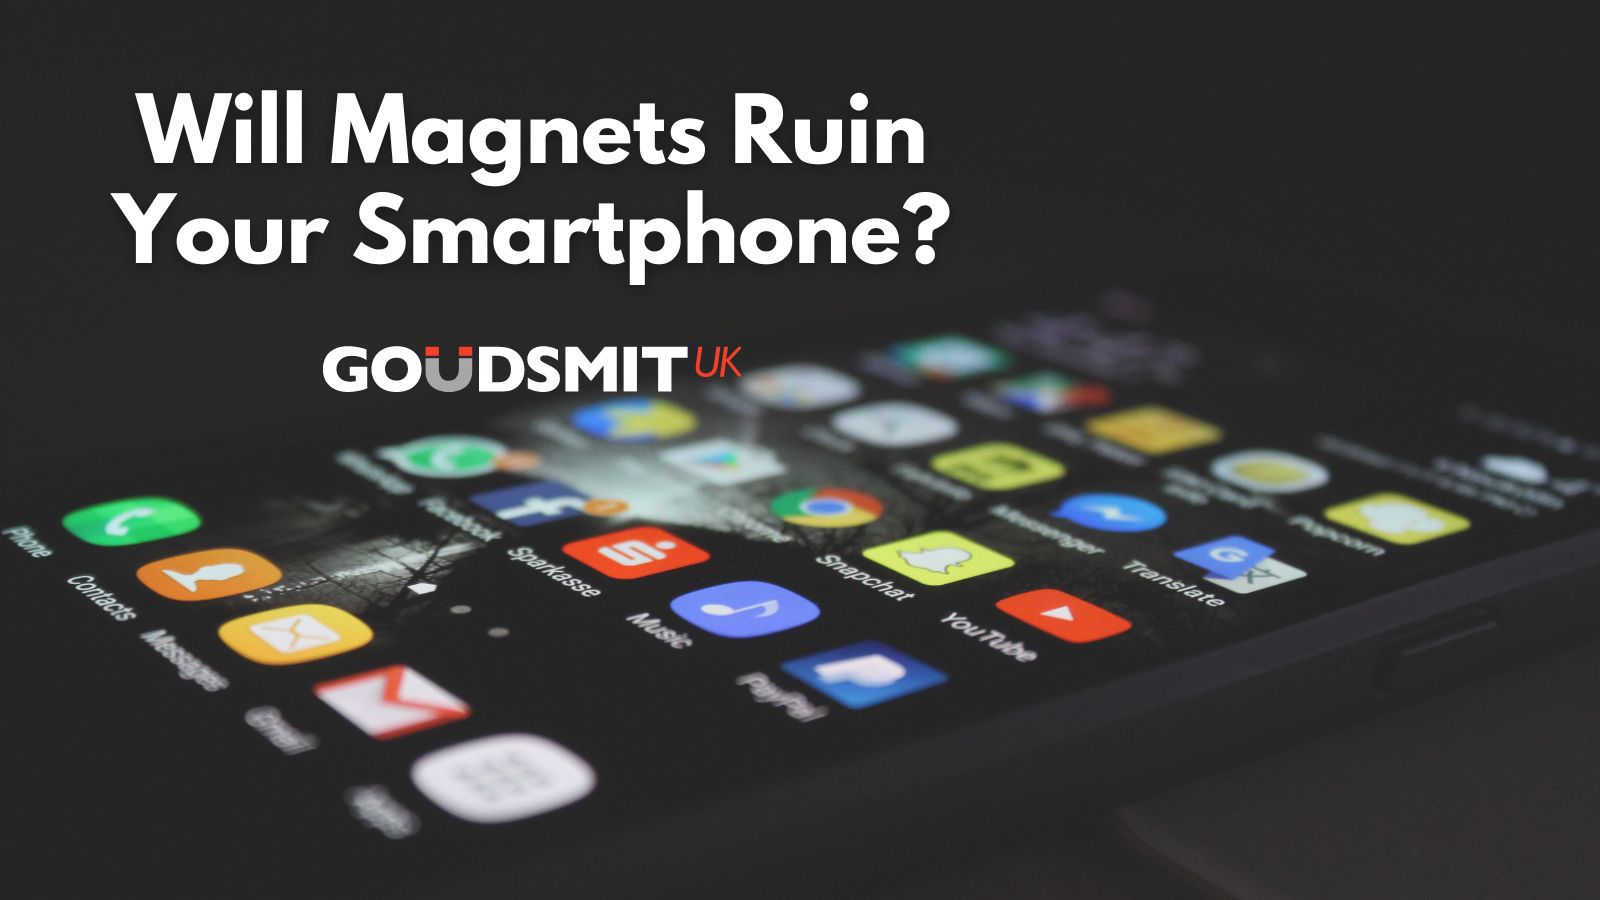 Will magnets ruin your smartphone?